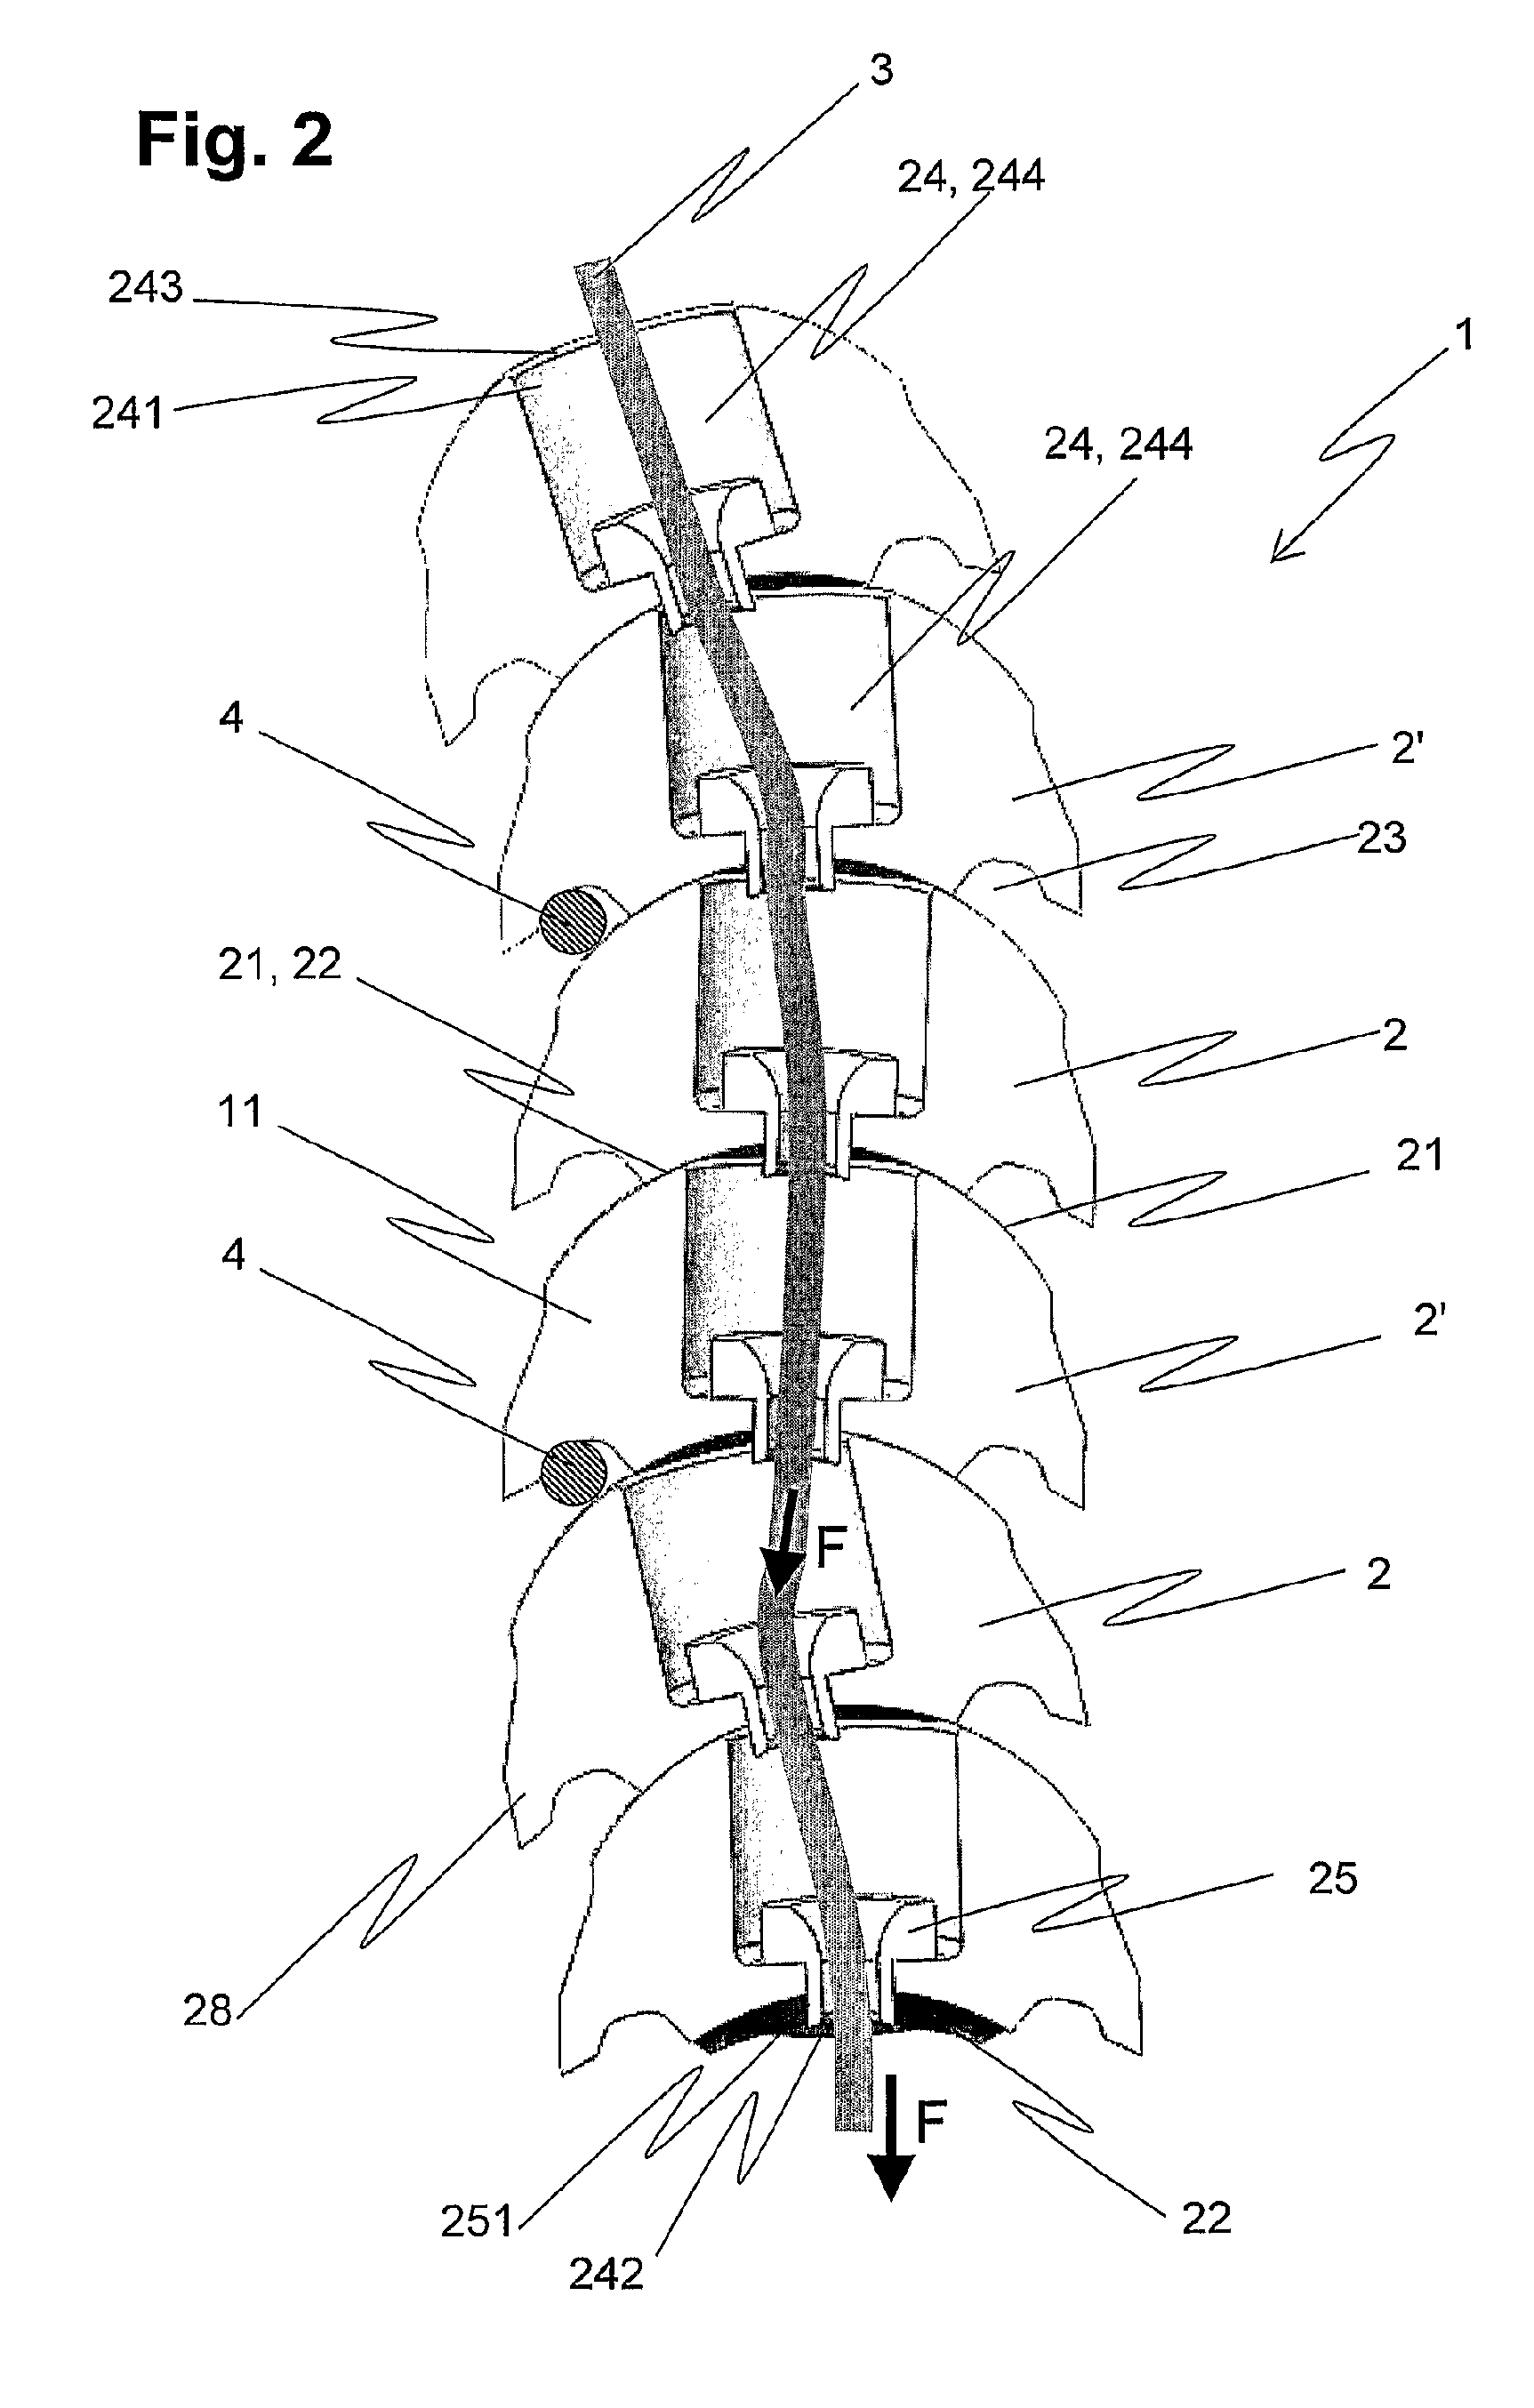 Device for externally fixing bone fractures